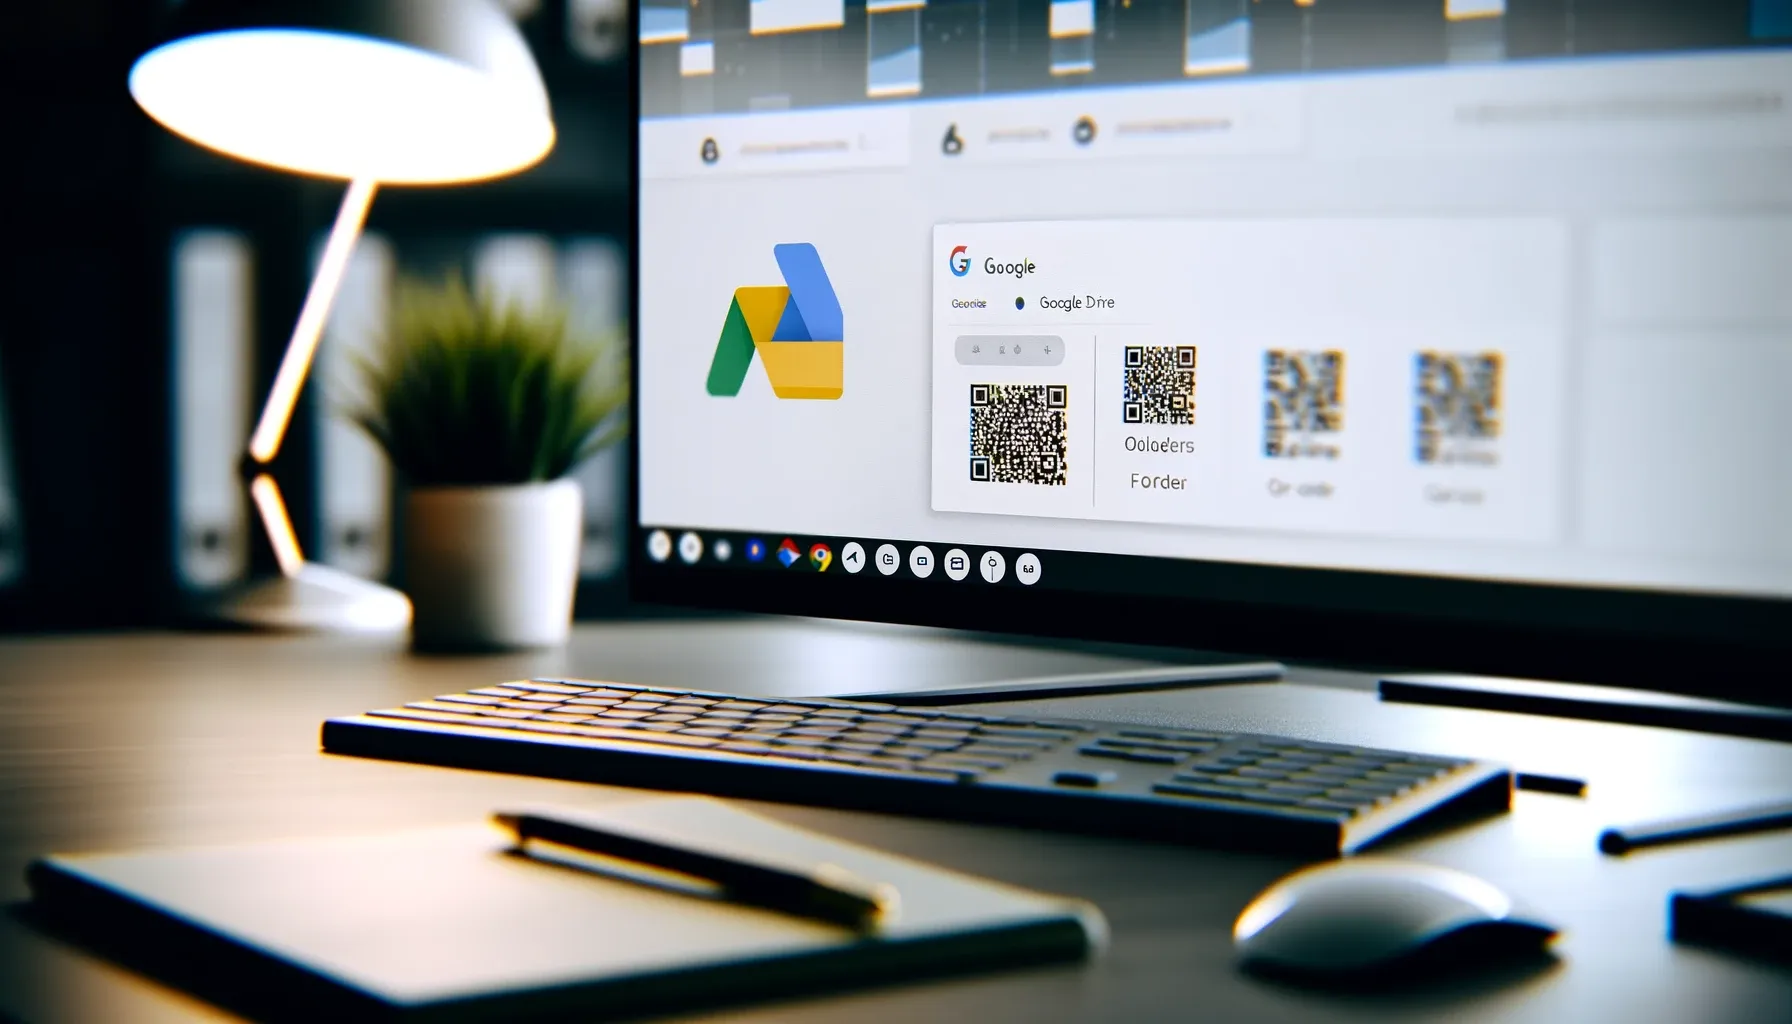 How to Create a QR Code for a Google Drive Folder